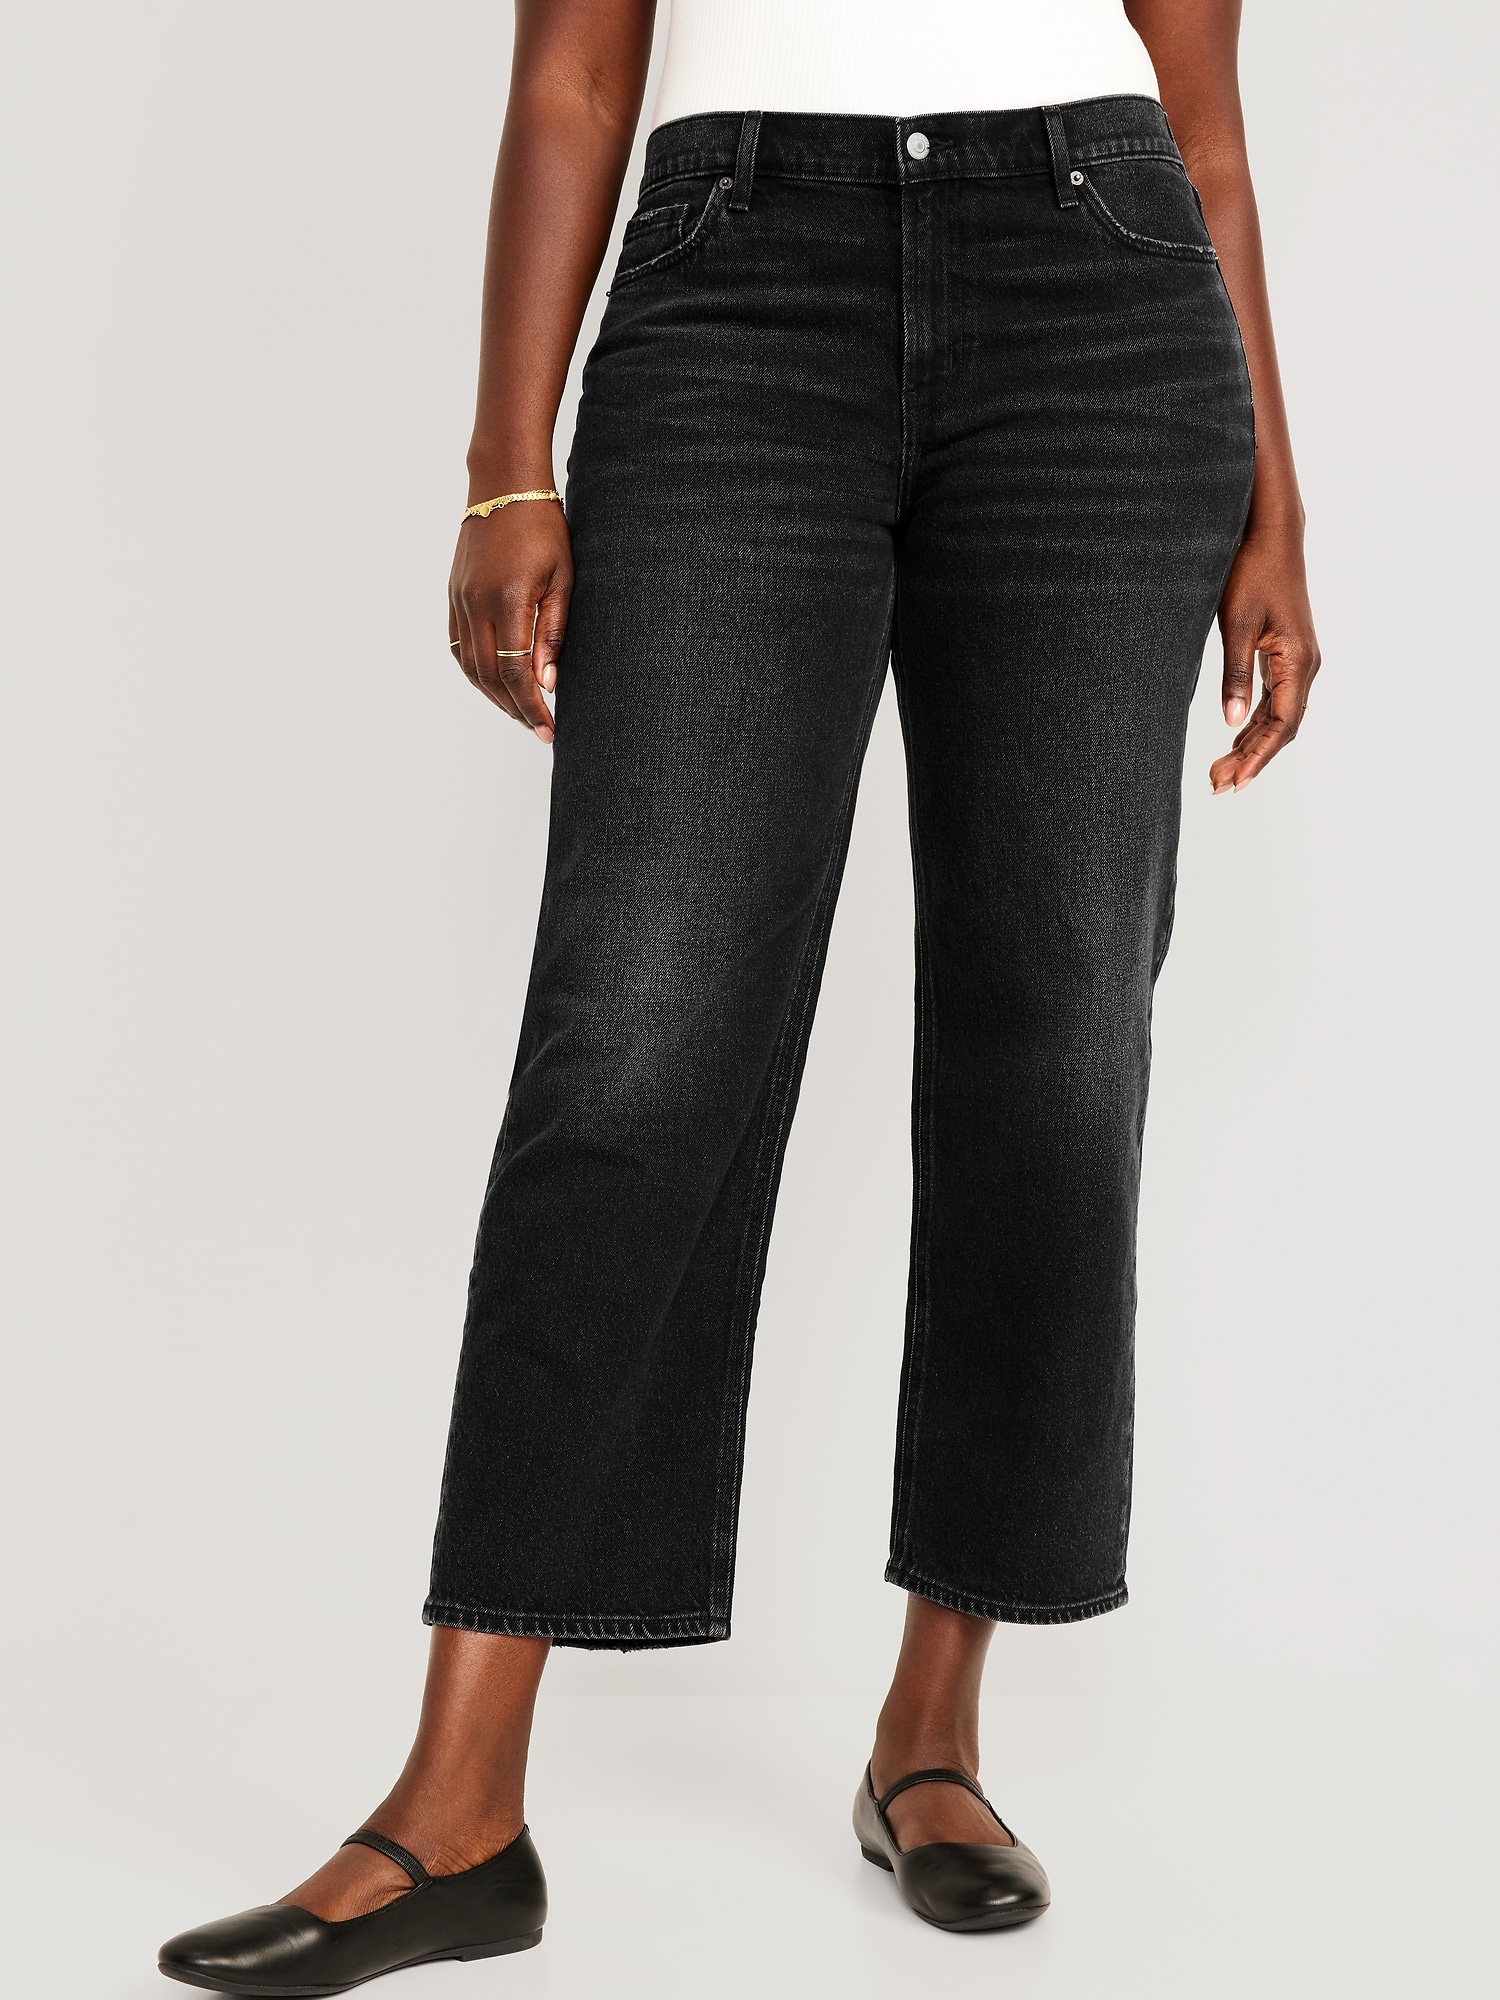 Mid-Rise Boyfriend Loose Black Jeans for Women | Old Navy